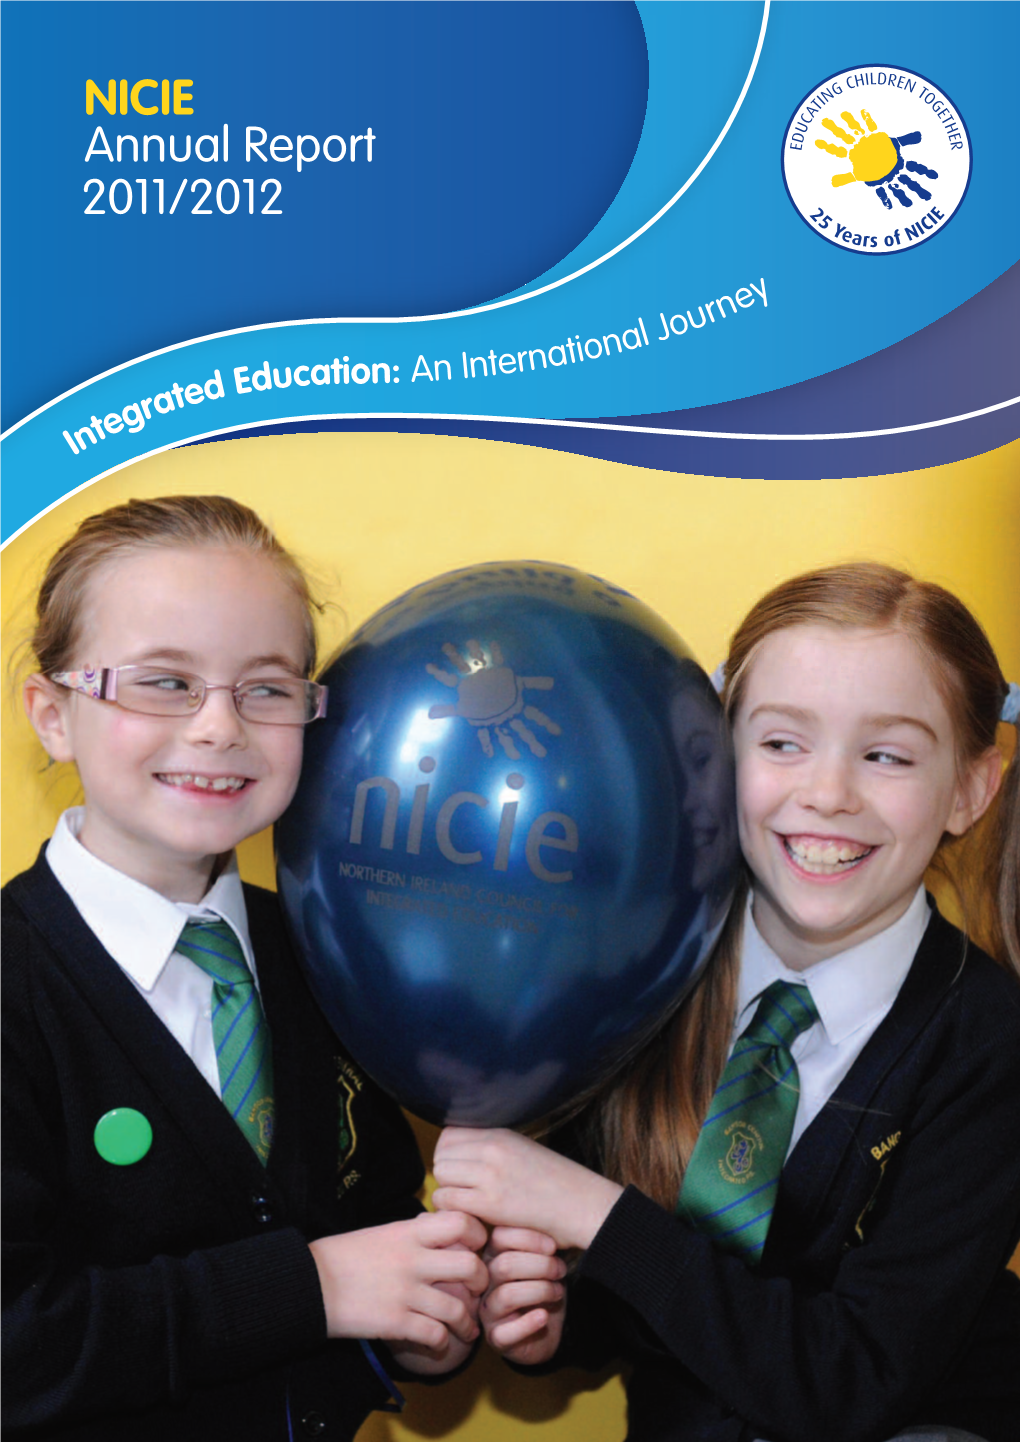 NICIE Annual Report 2011/2012